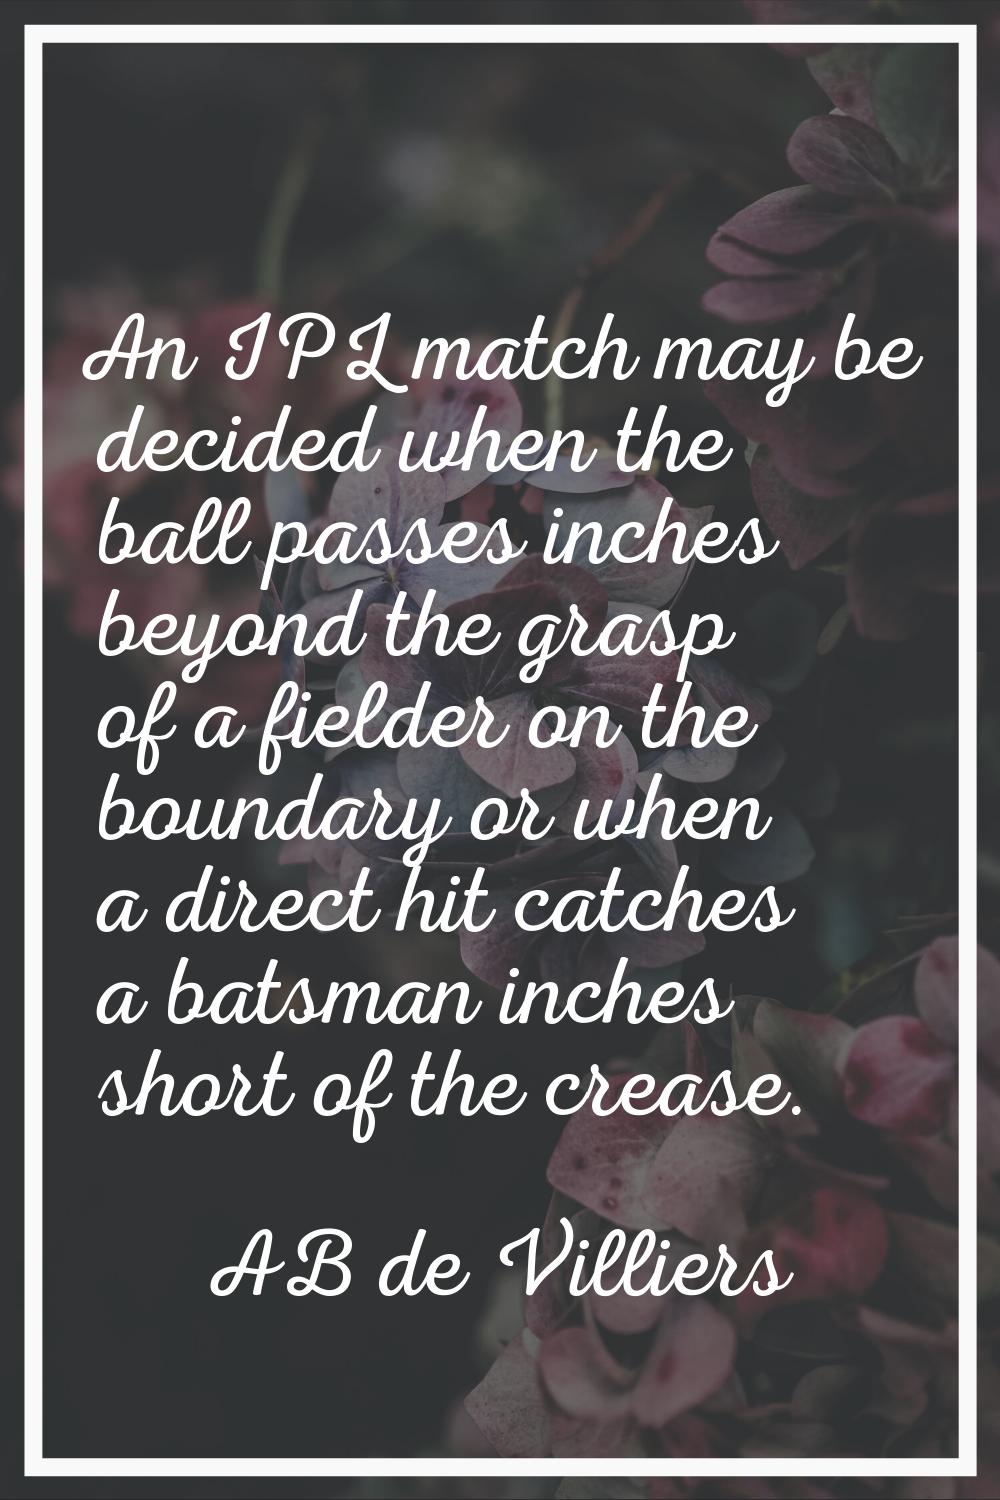 An IPL match may be decided when the ball passes inches beyond the grasp of a fielder on the bounda